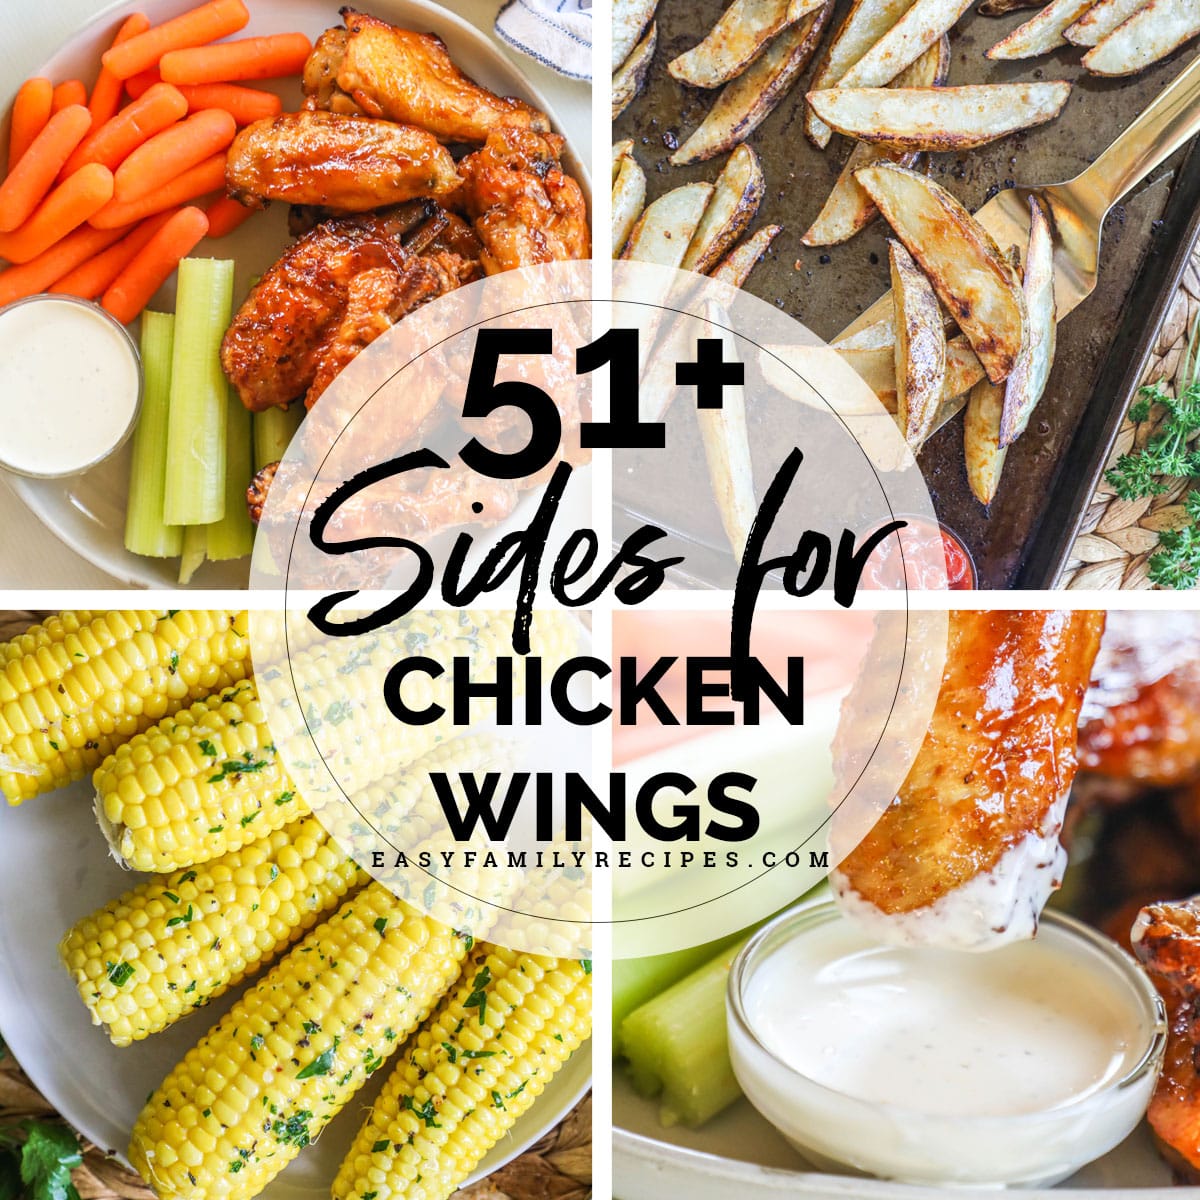 51+ Best Sides for Chicken Wings